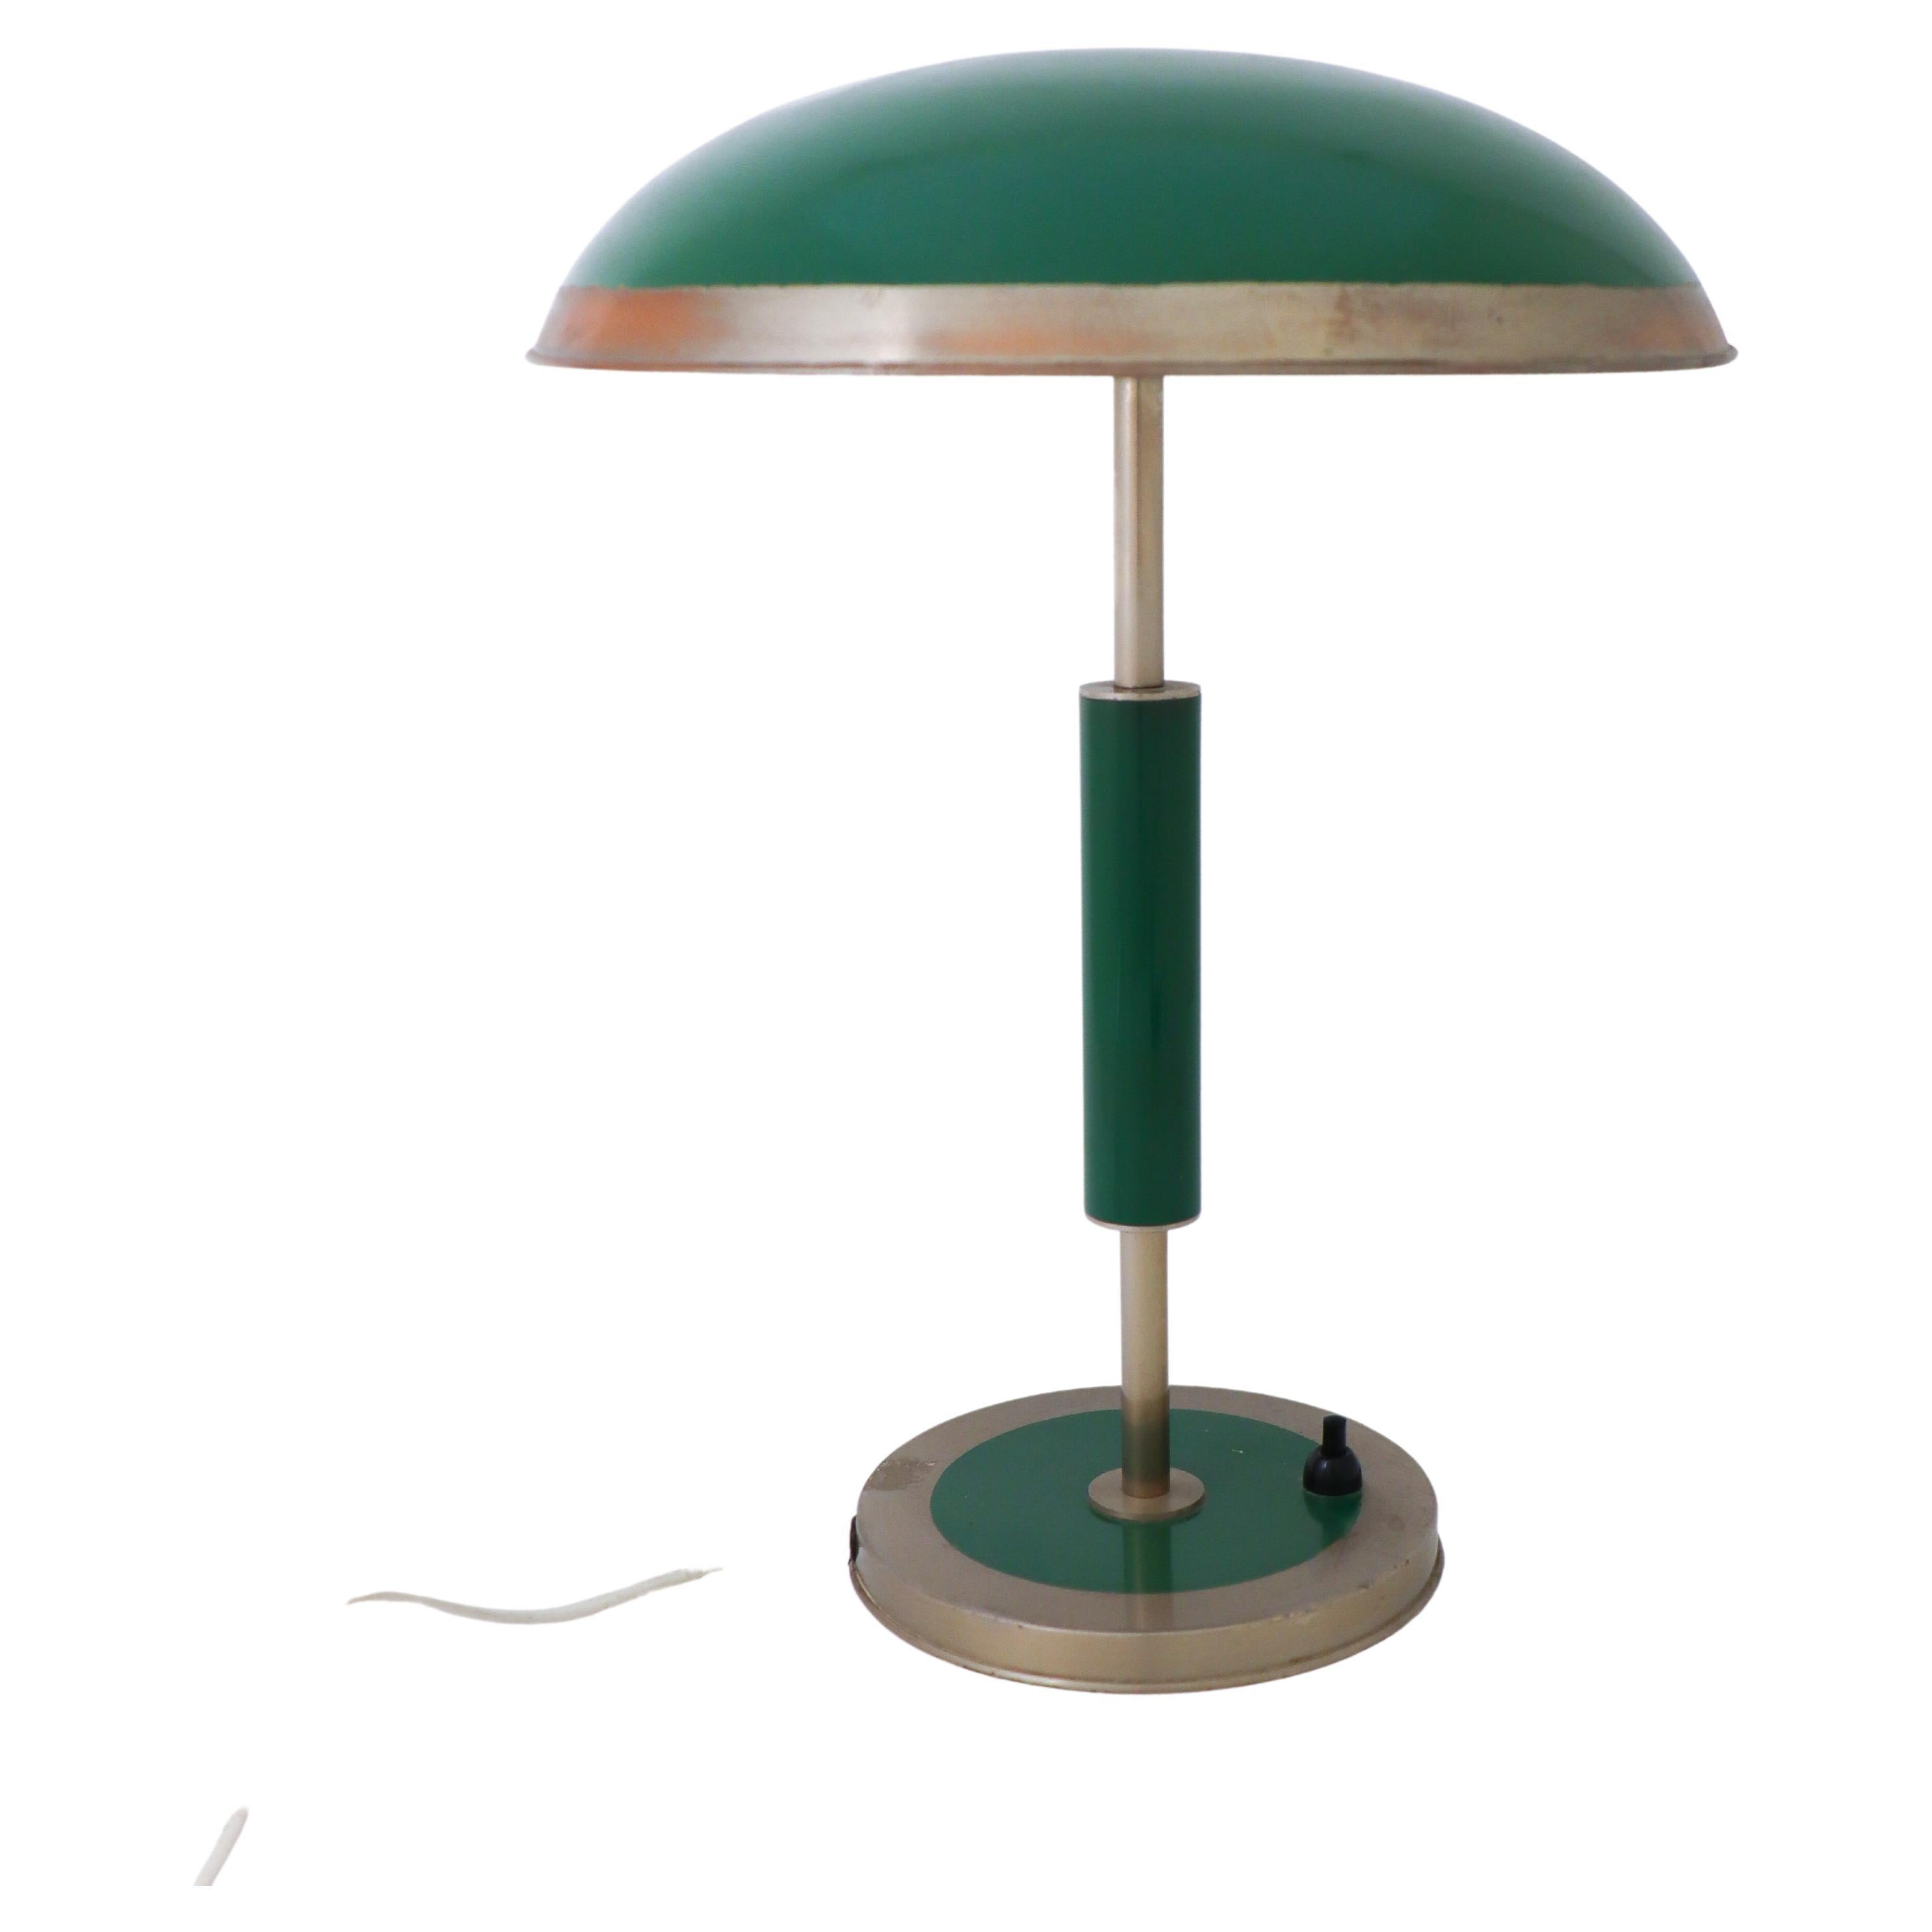 Lovely Green Art Deco Table Lamp with Tin Shade, Probably Sweden 1930-1940s For Sale